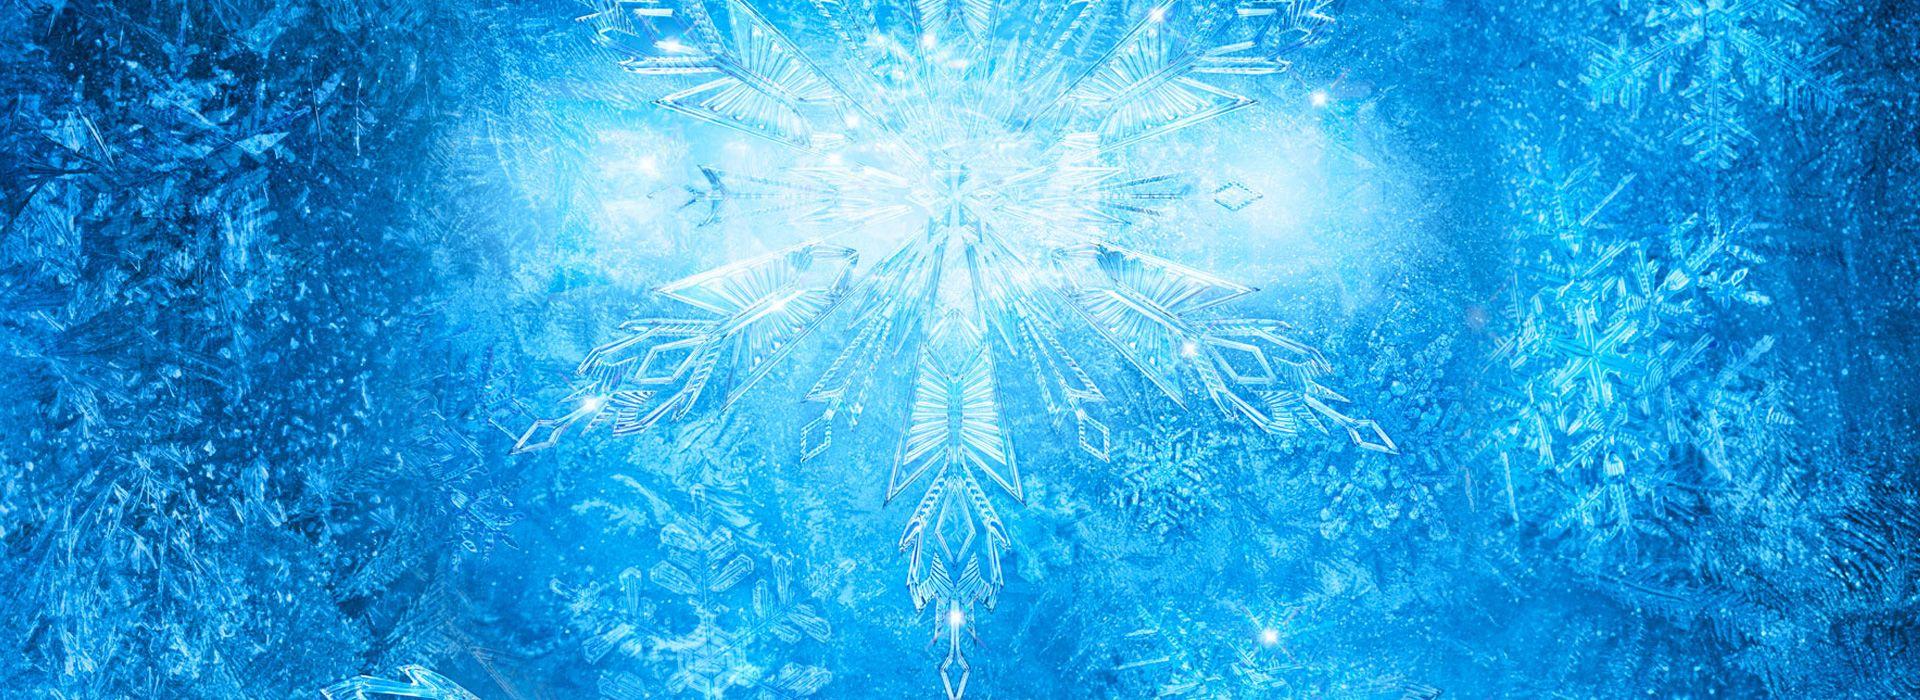 disney frozen background png 2417. Background Check All